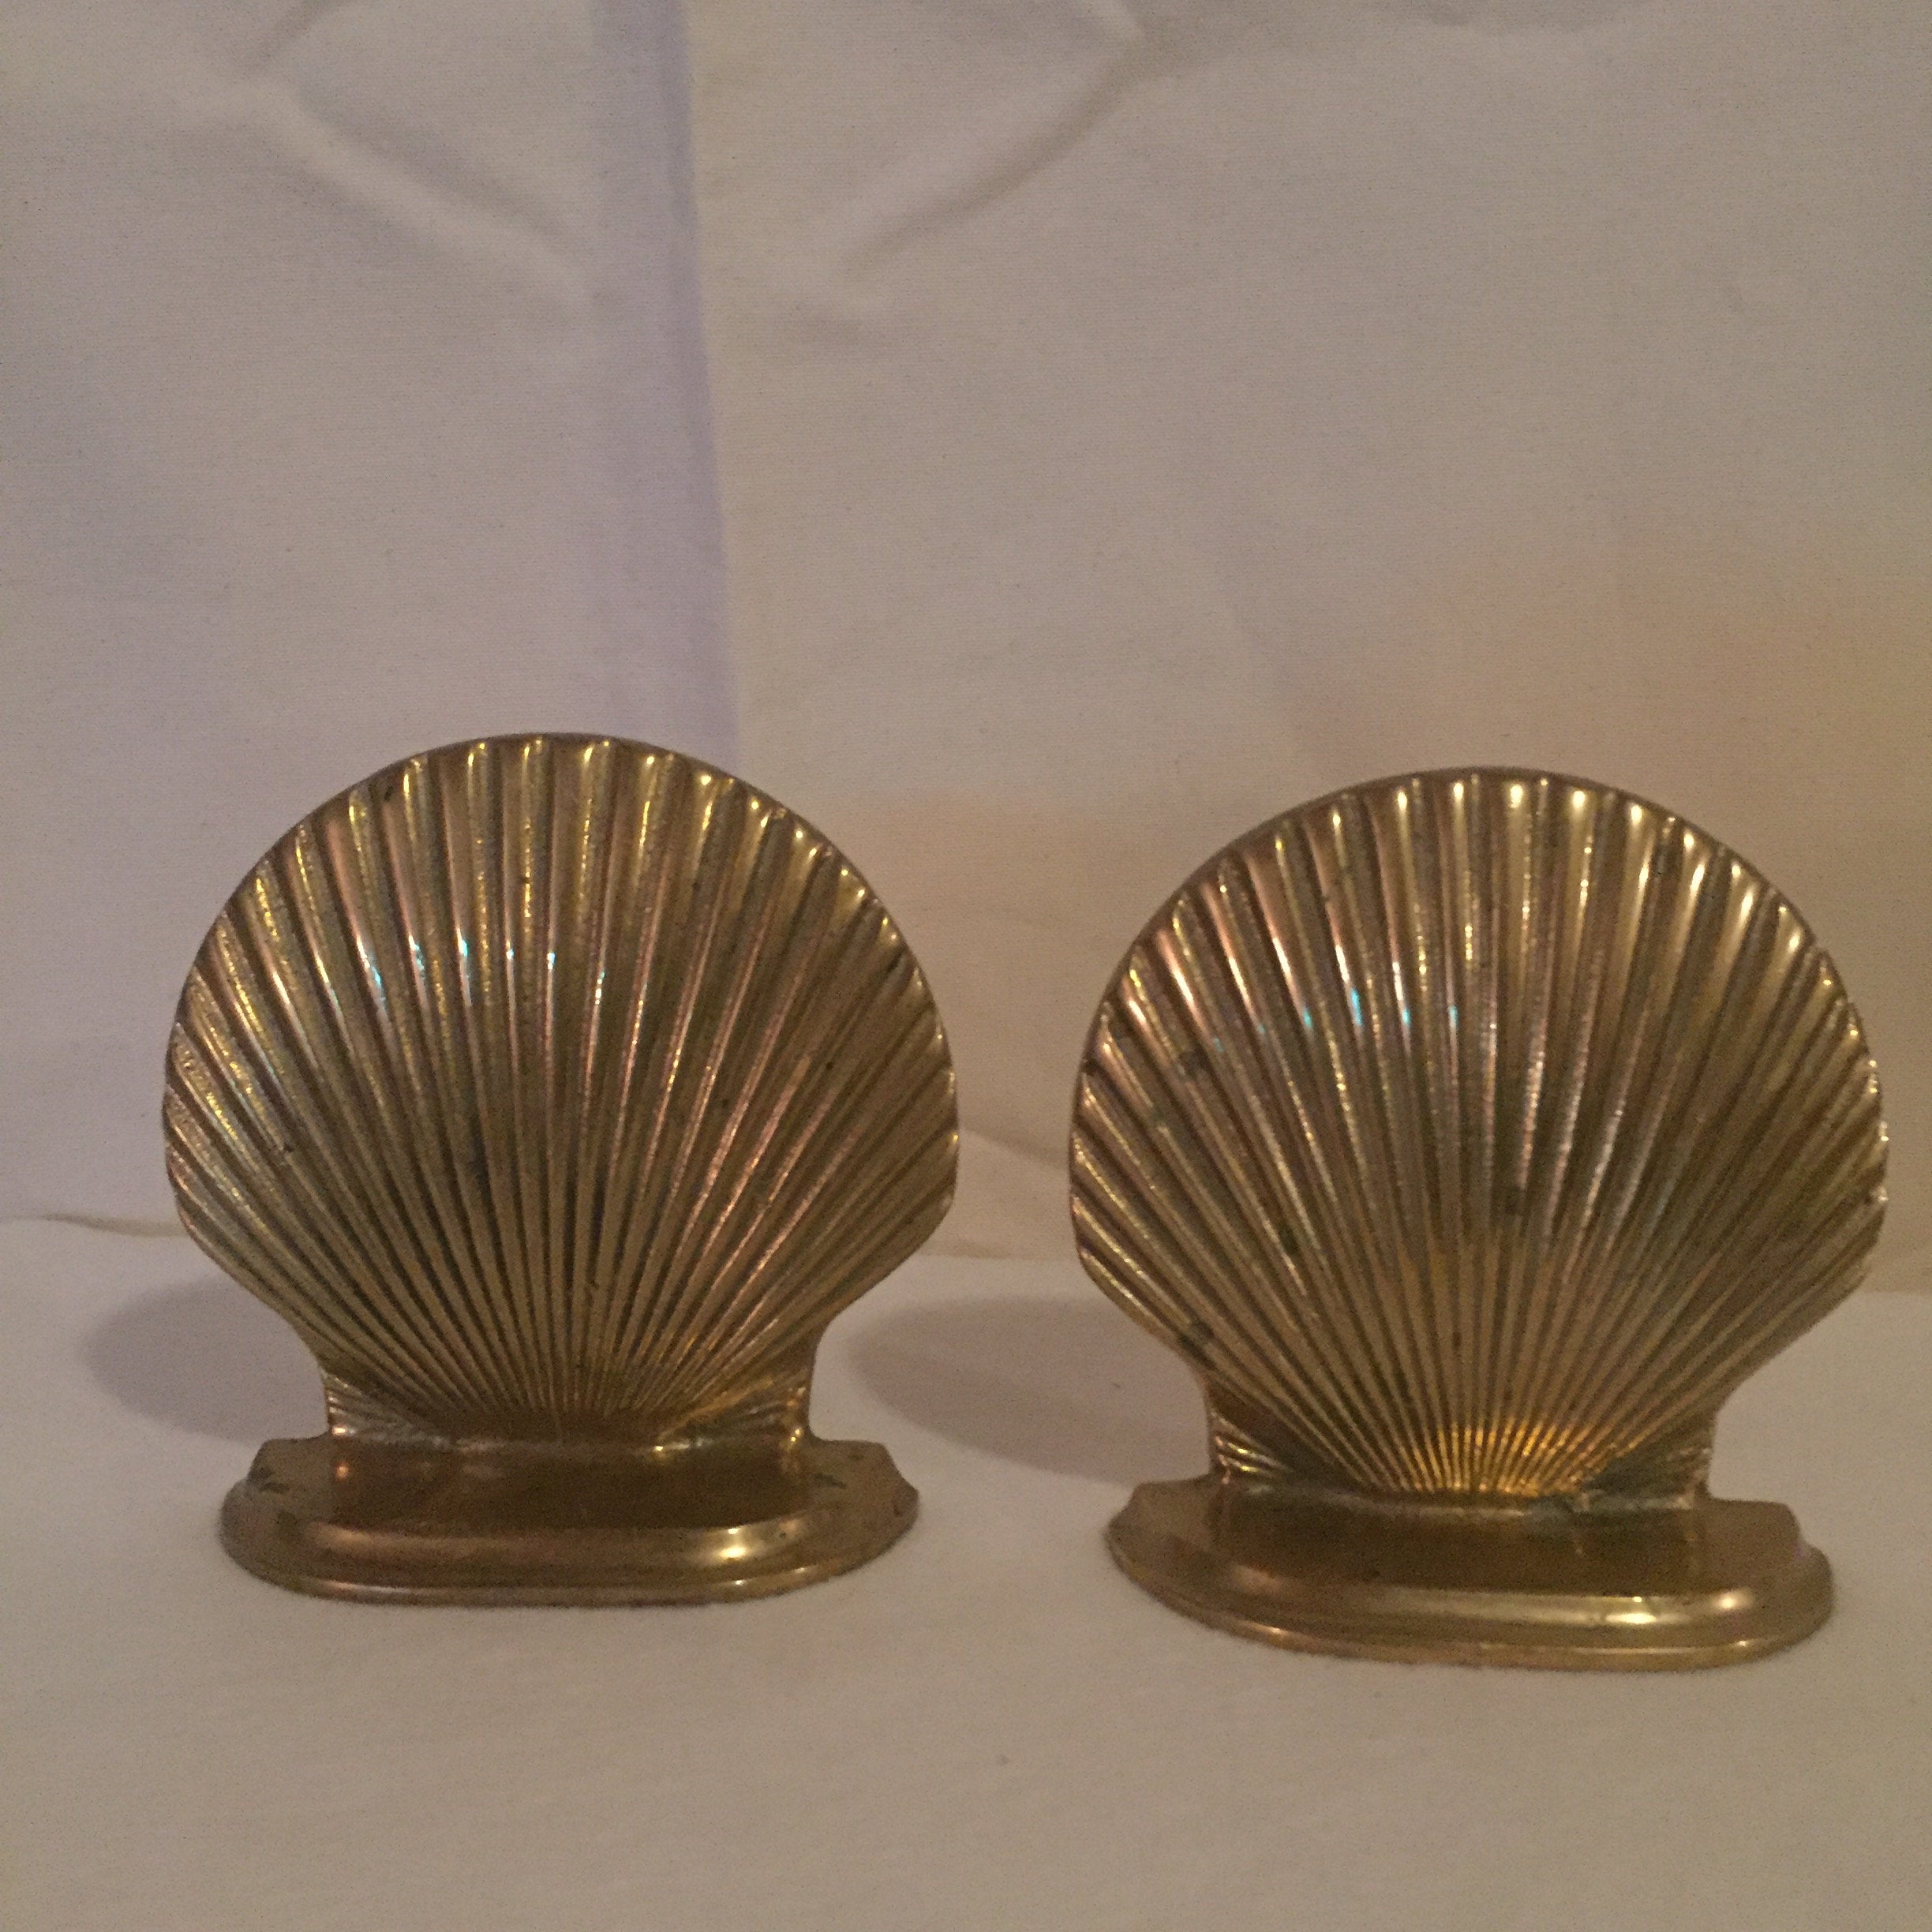 Heavy Brass Clam Sea Shell Bookends